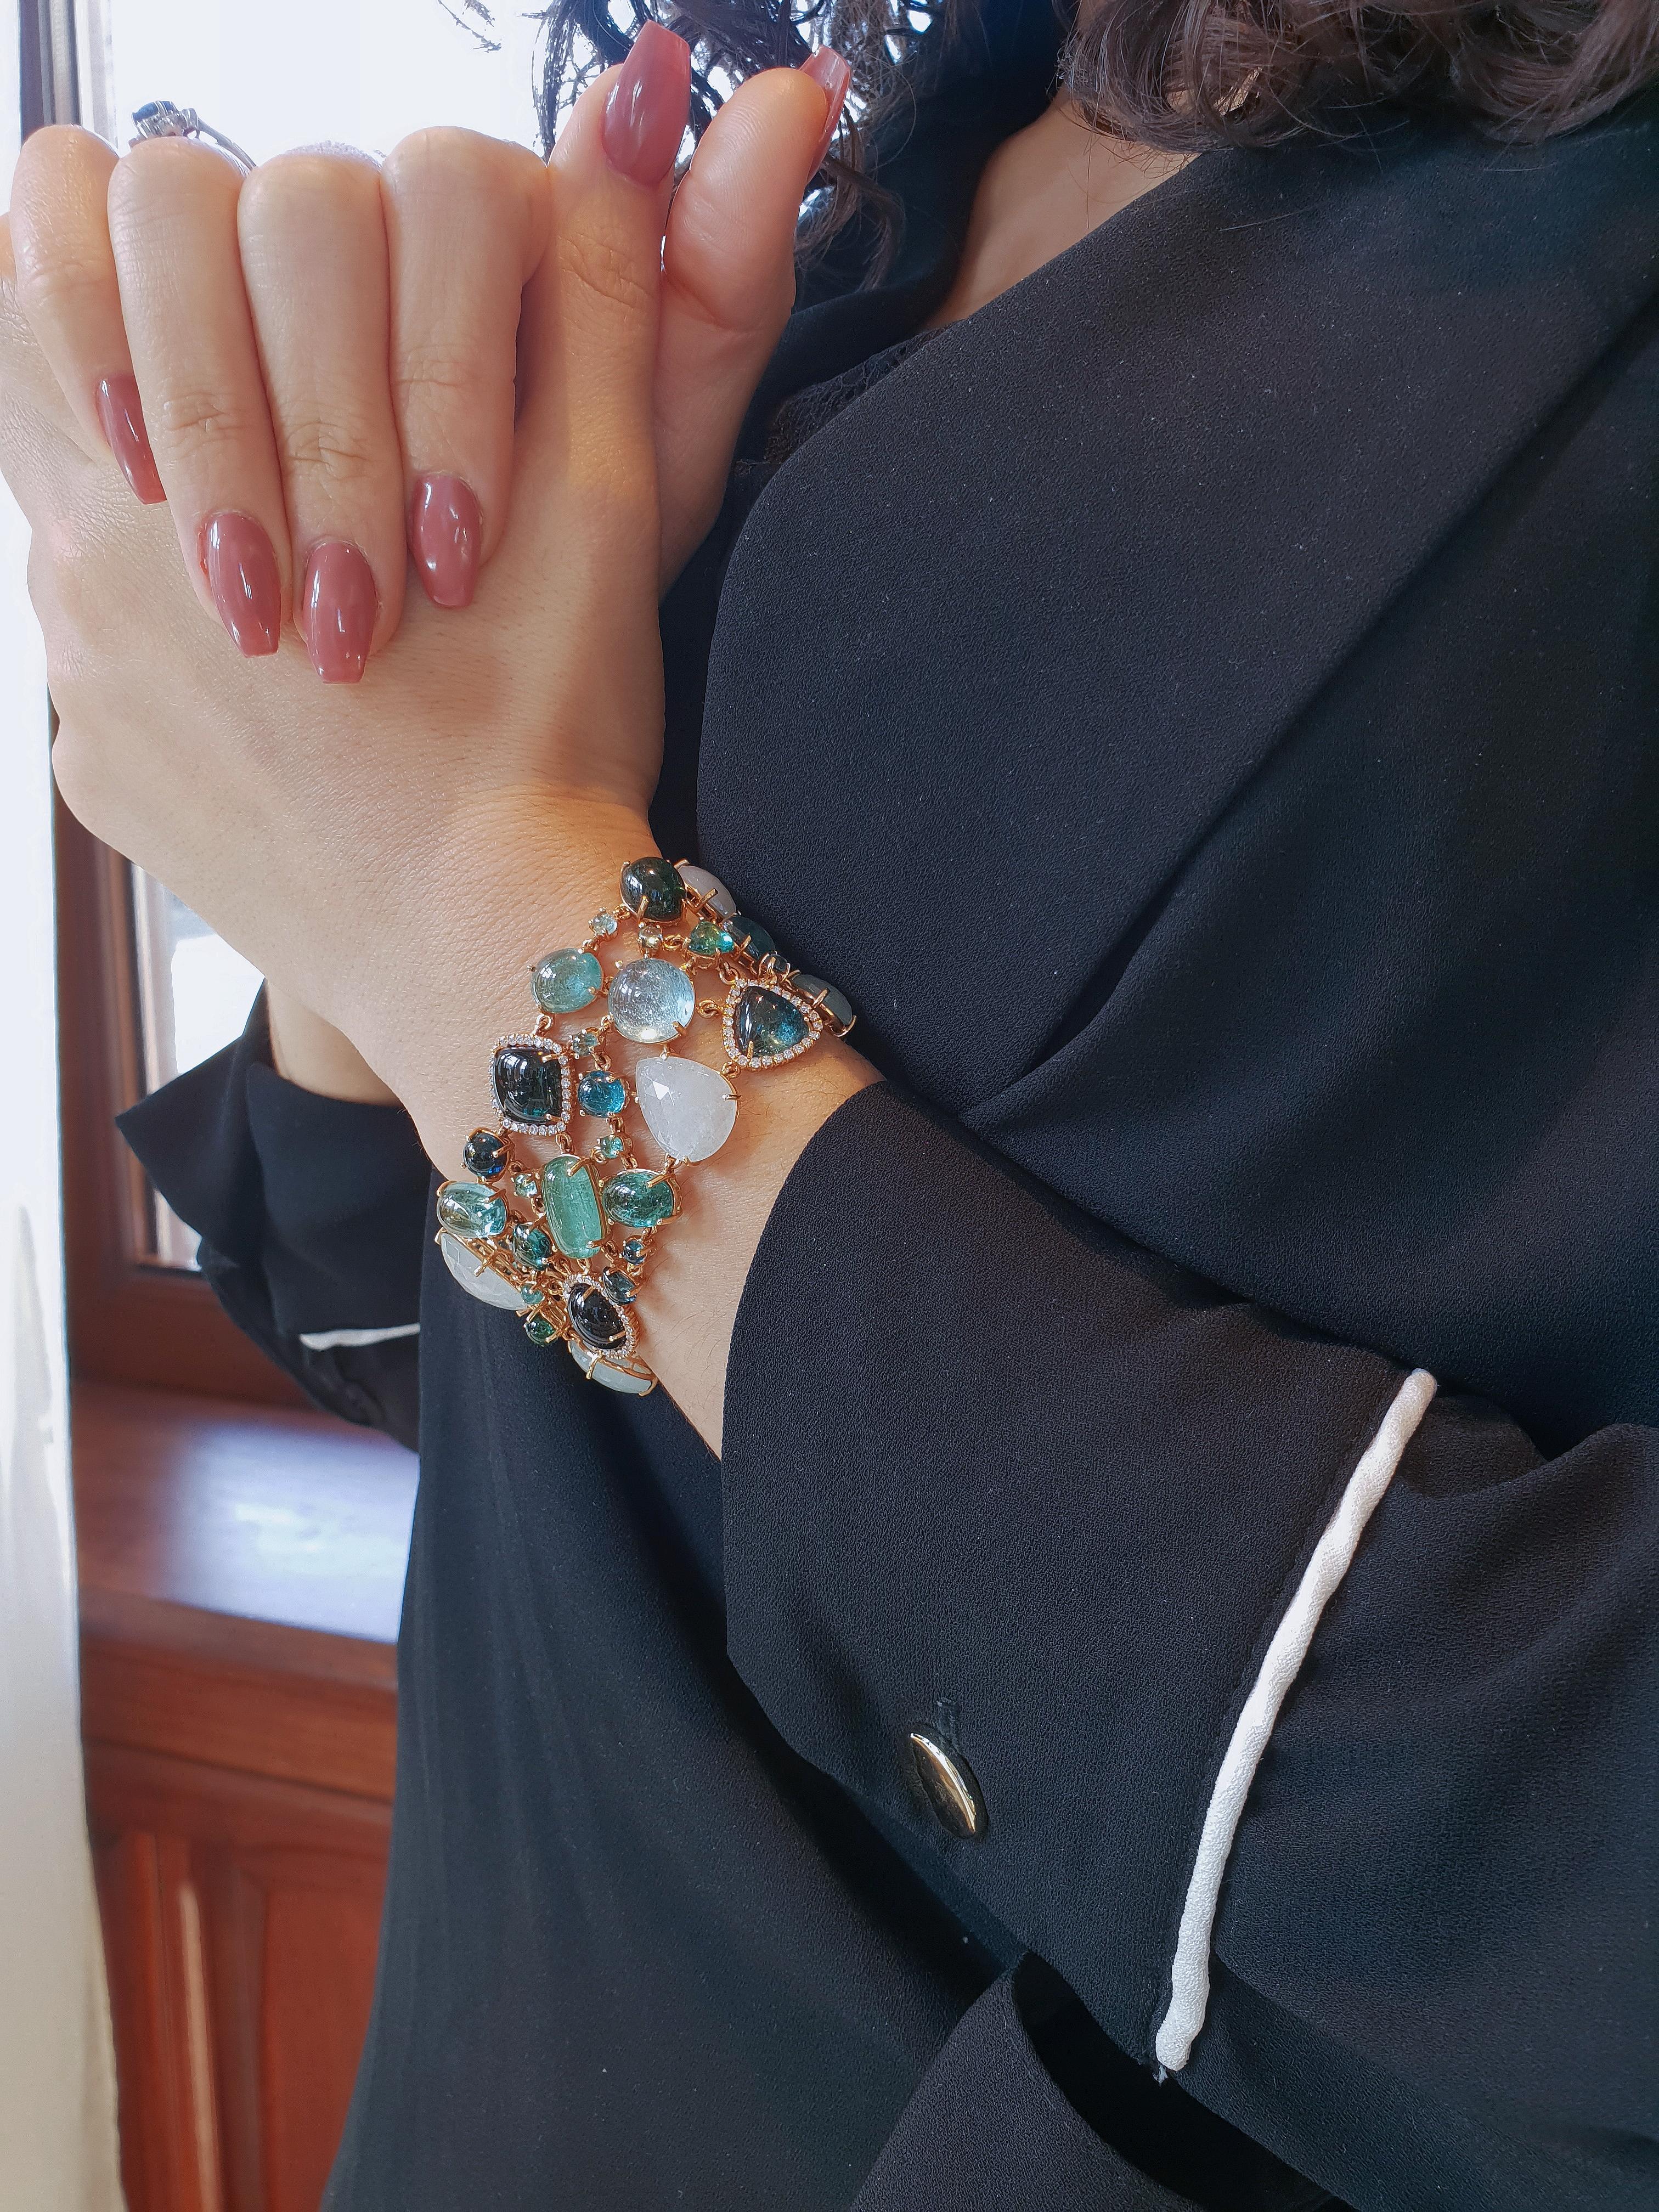 Meet your new colour crush. This bold and breathtaking 35 mm wide bracelet boats 50 multi-shaped blue greenish tourmalines, indigolite and milky aqumarine, a total of 32.16 carat gems and 1.36ct diamonds in a Top Wesseltion VVS-VS quality.

The